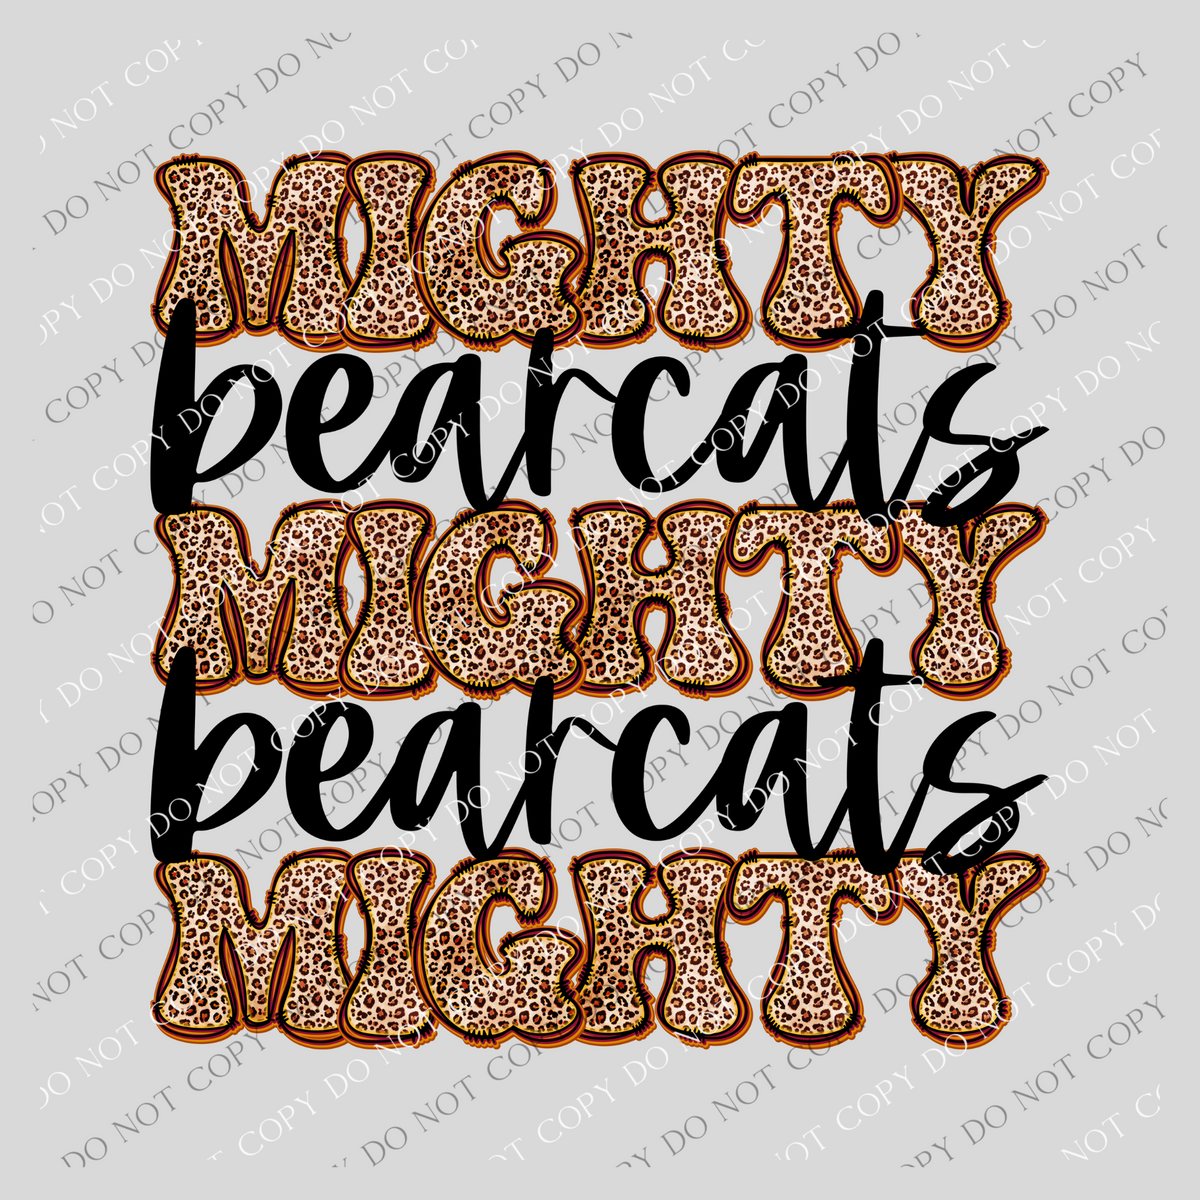 Bearcats Mighty Mighty Mighty Leopard Stacked Retro Doodle Black PNG